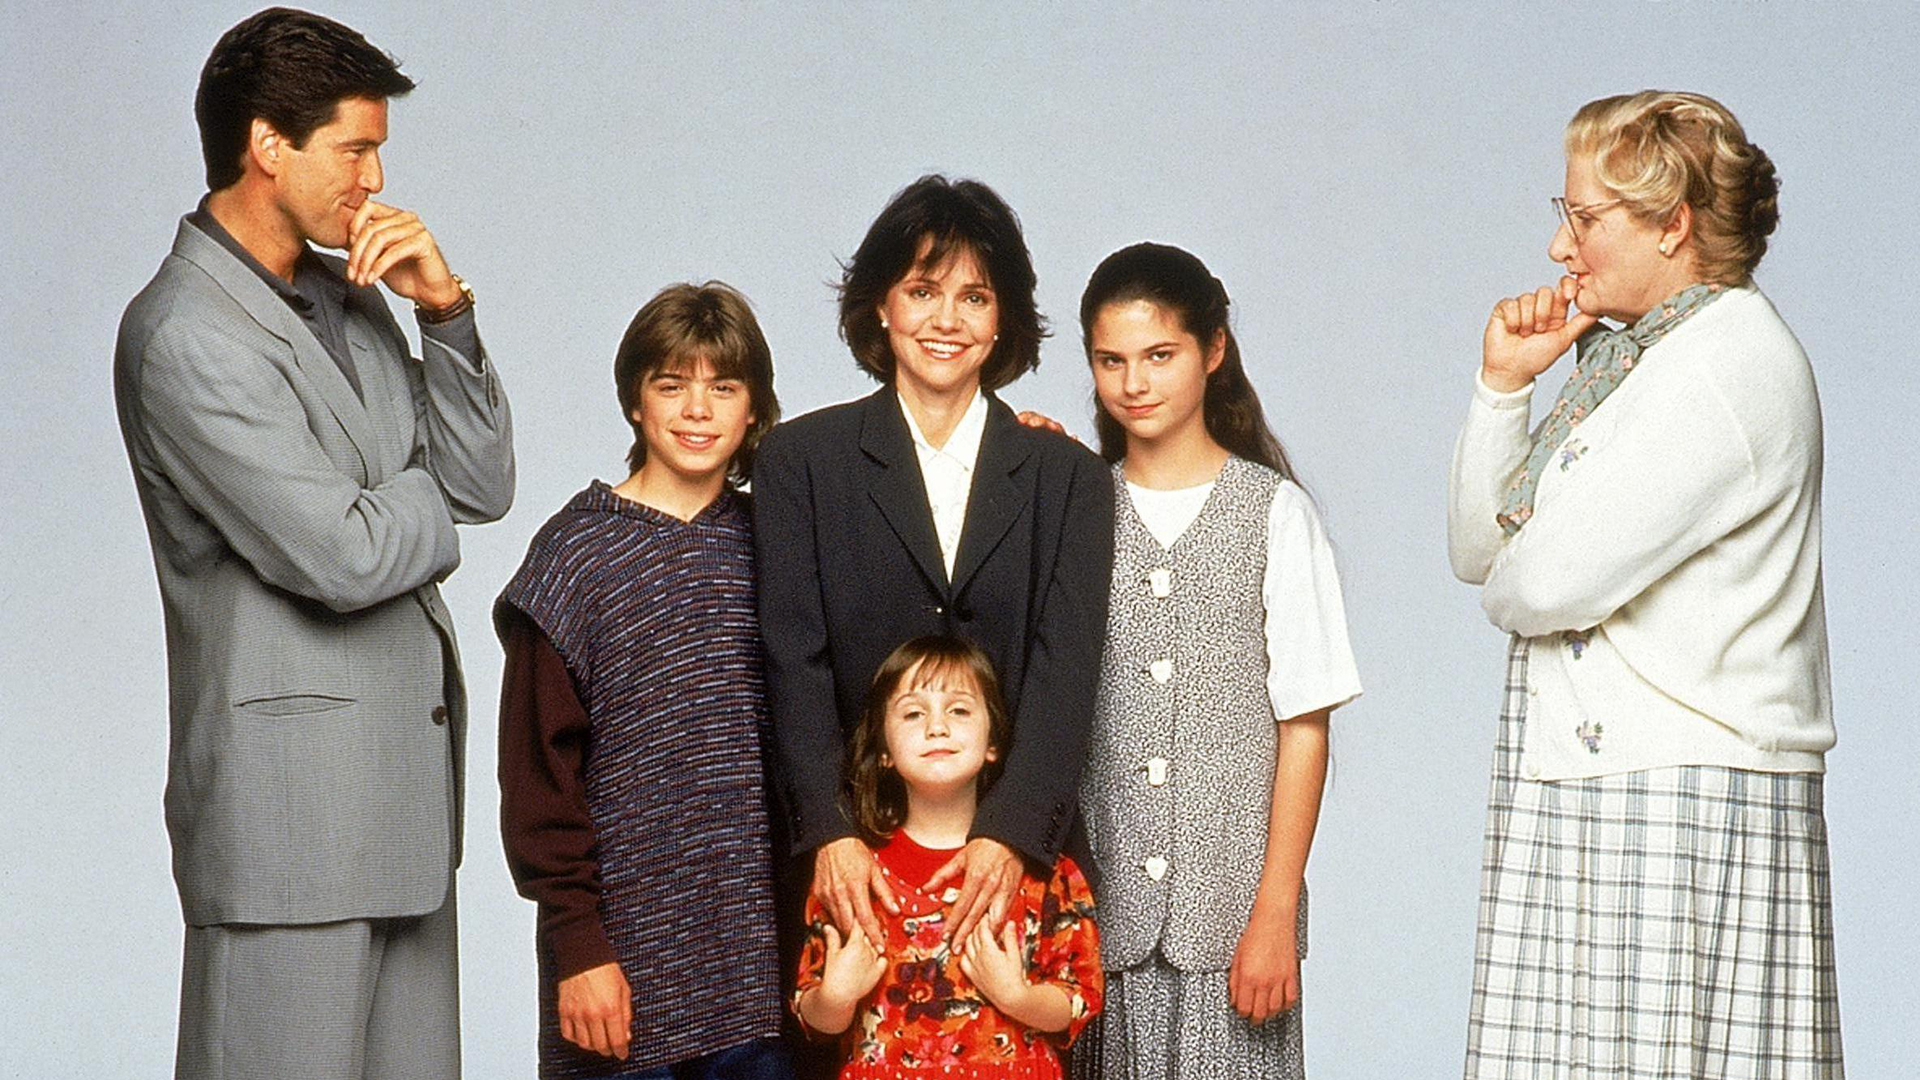 Hilarity and Heart: 9 Classic Comedies About Family Values